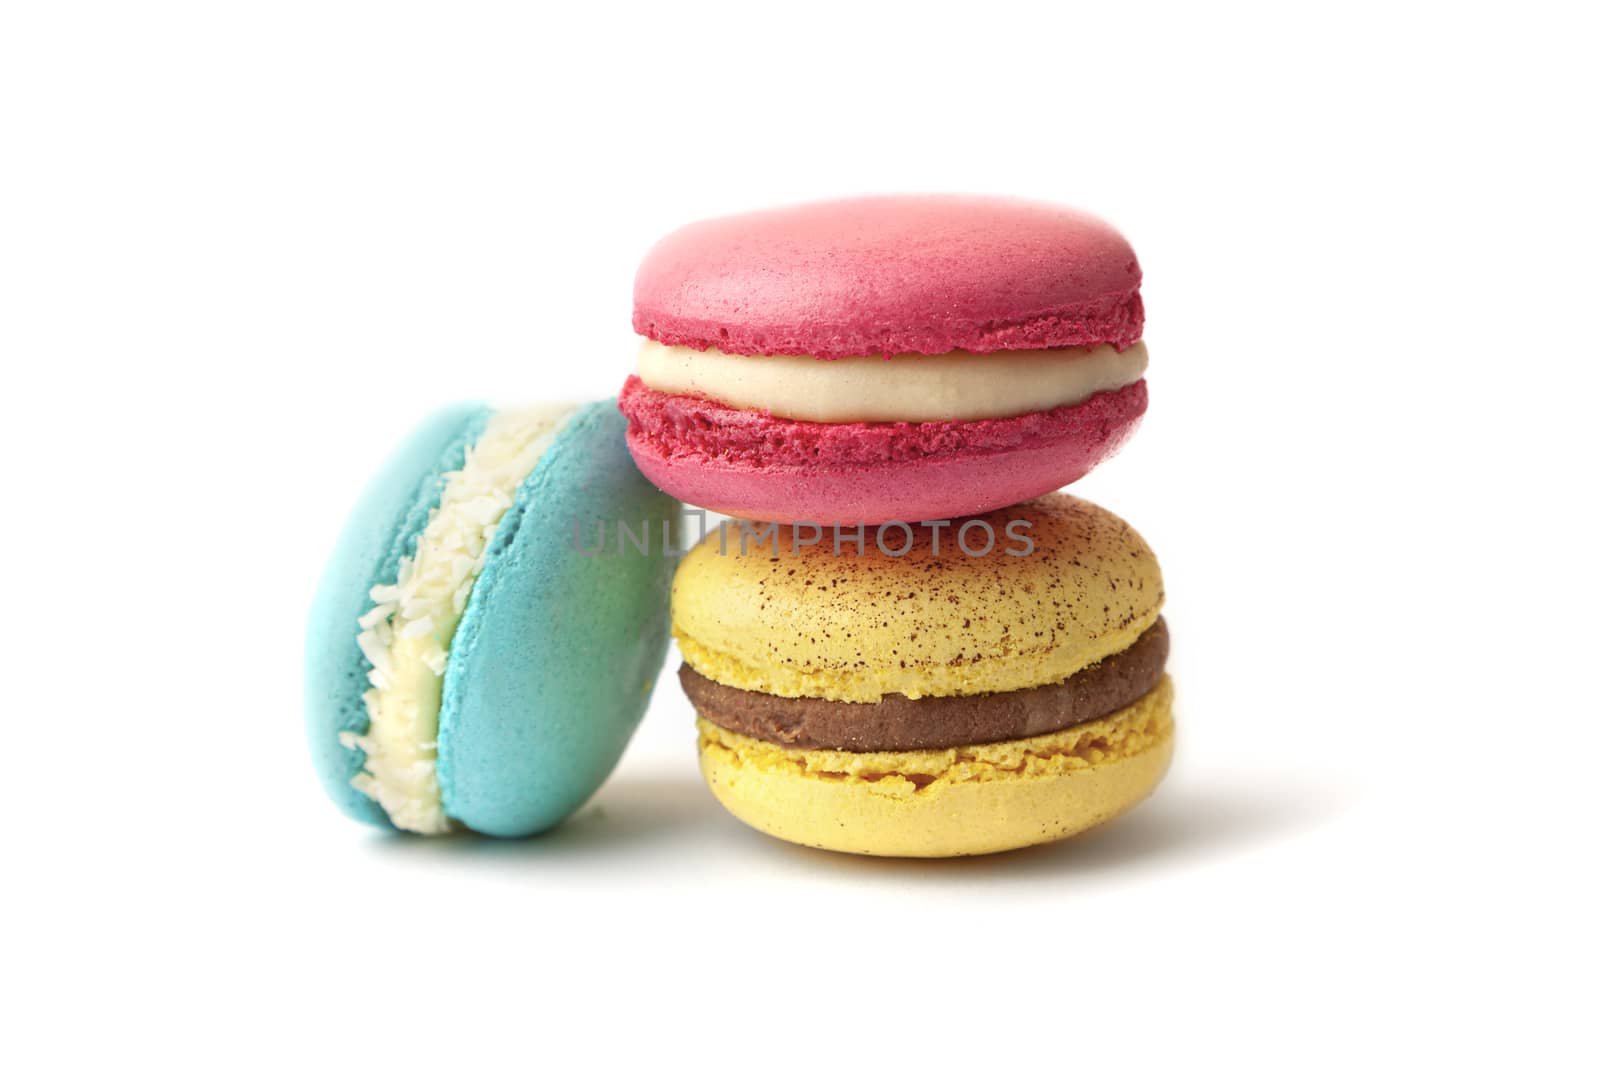 Sweet and colorful french macaroons isolated on white by SlayCer